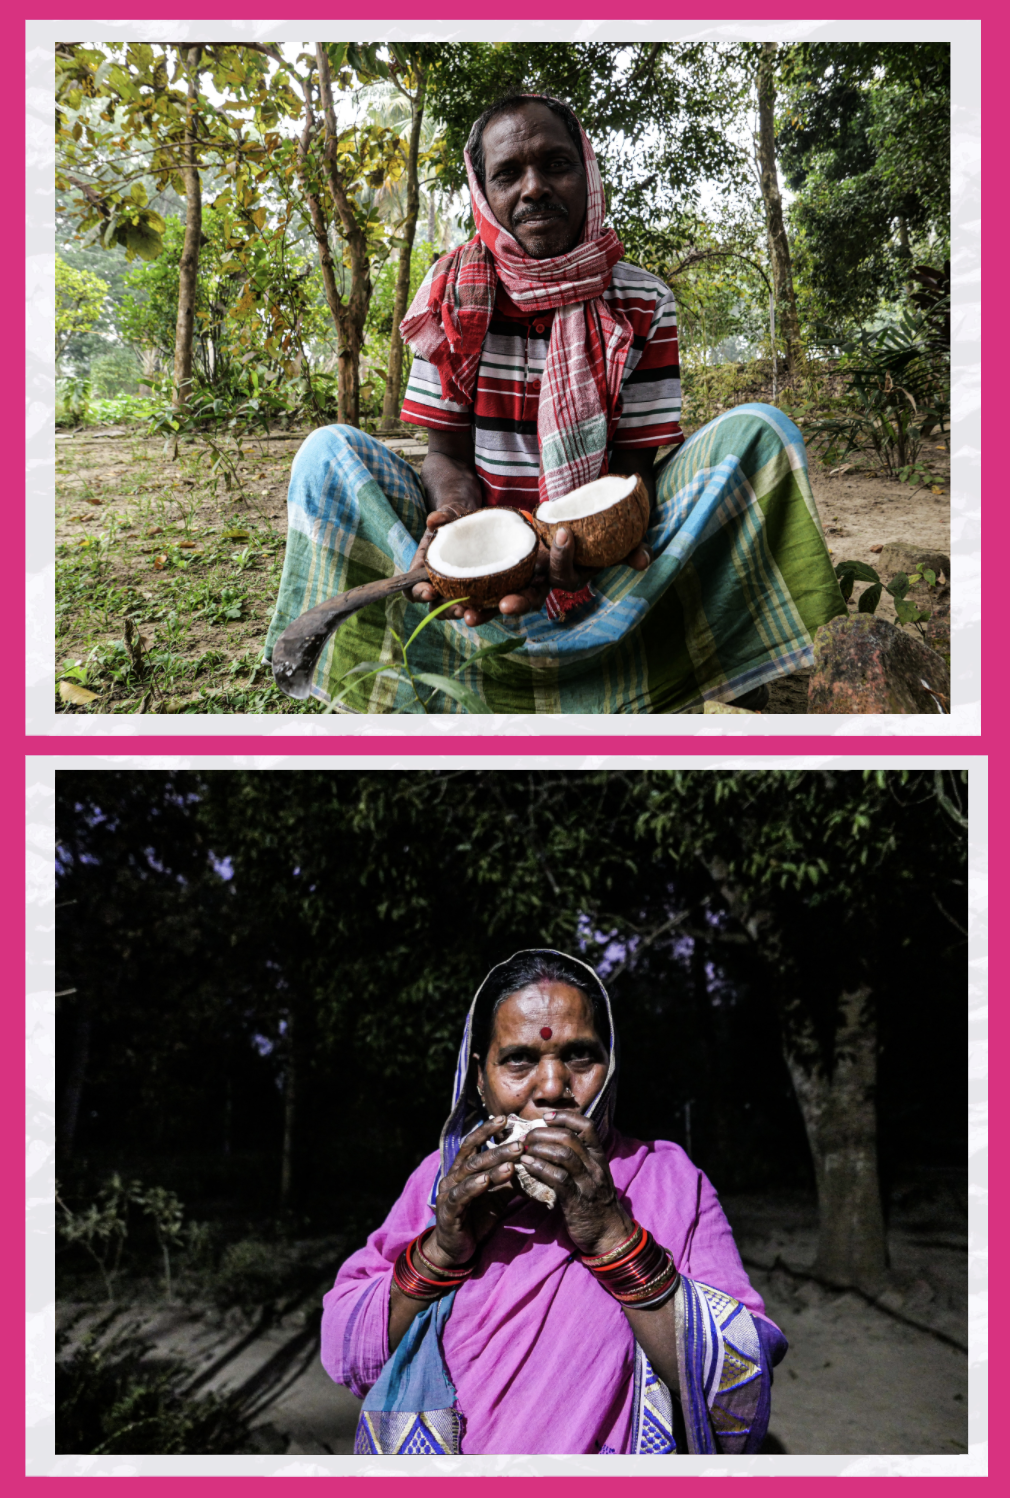 Two images: 1: Freshly cracked coconut. 2: Kobita, whose name means 'poem' blowing the conch, a Hindu call to prayer